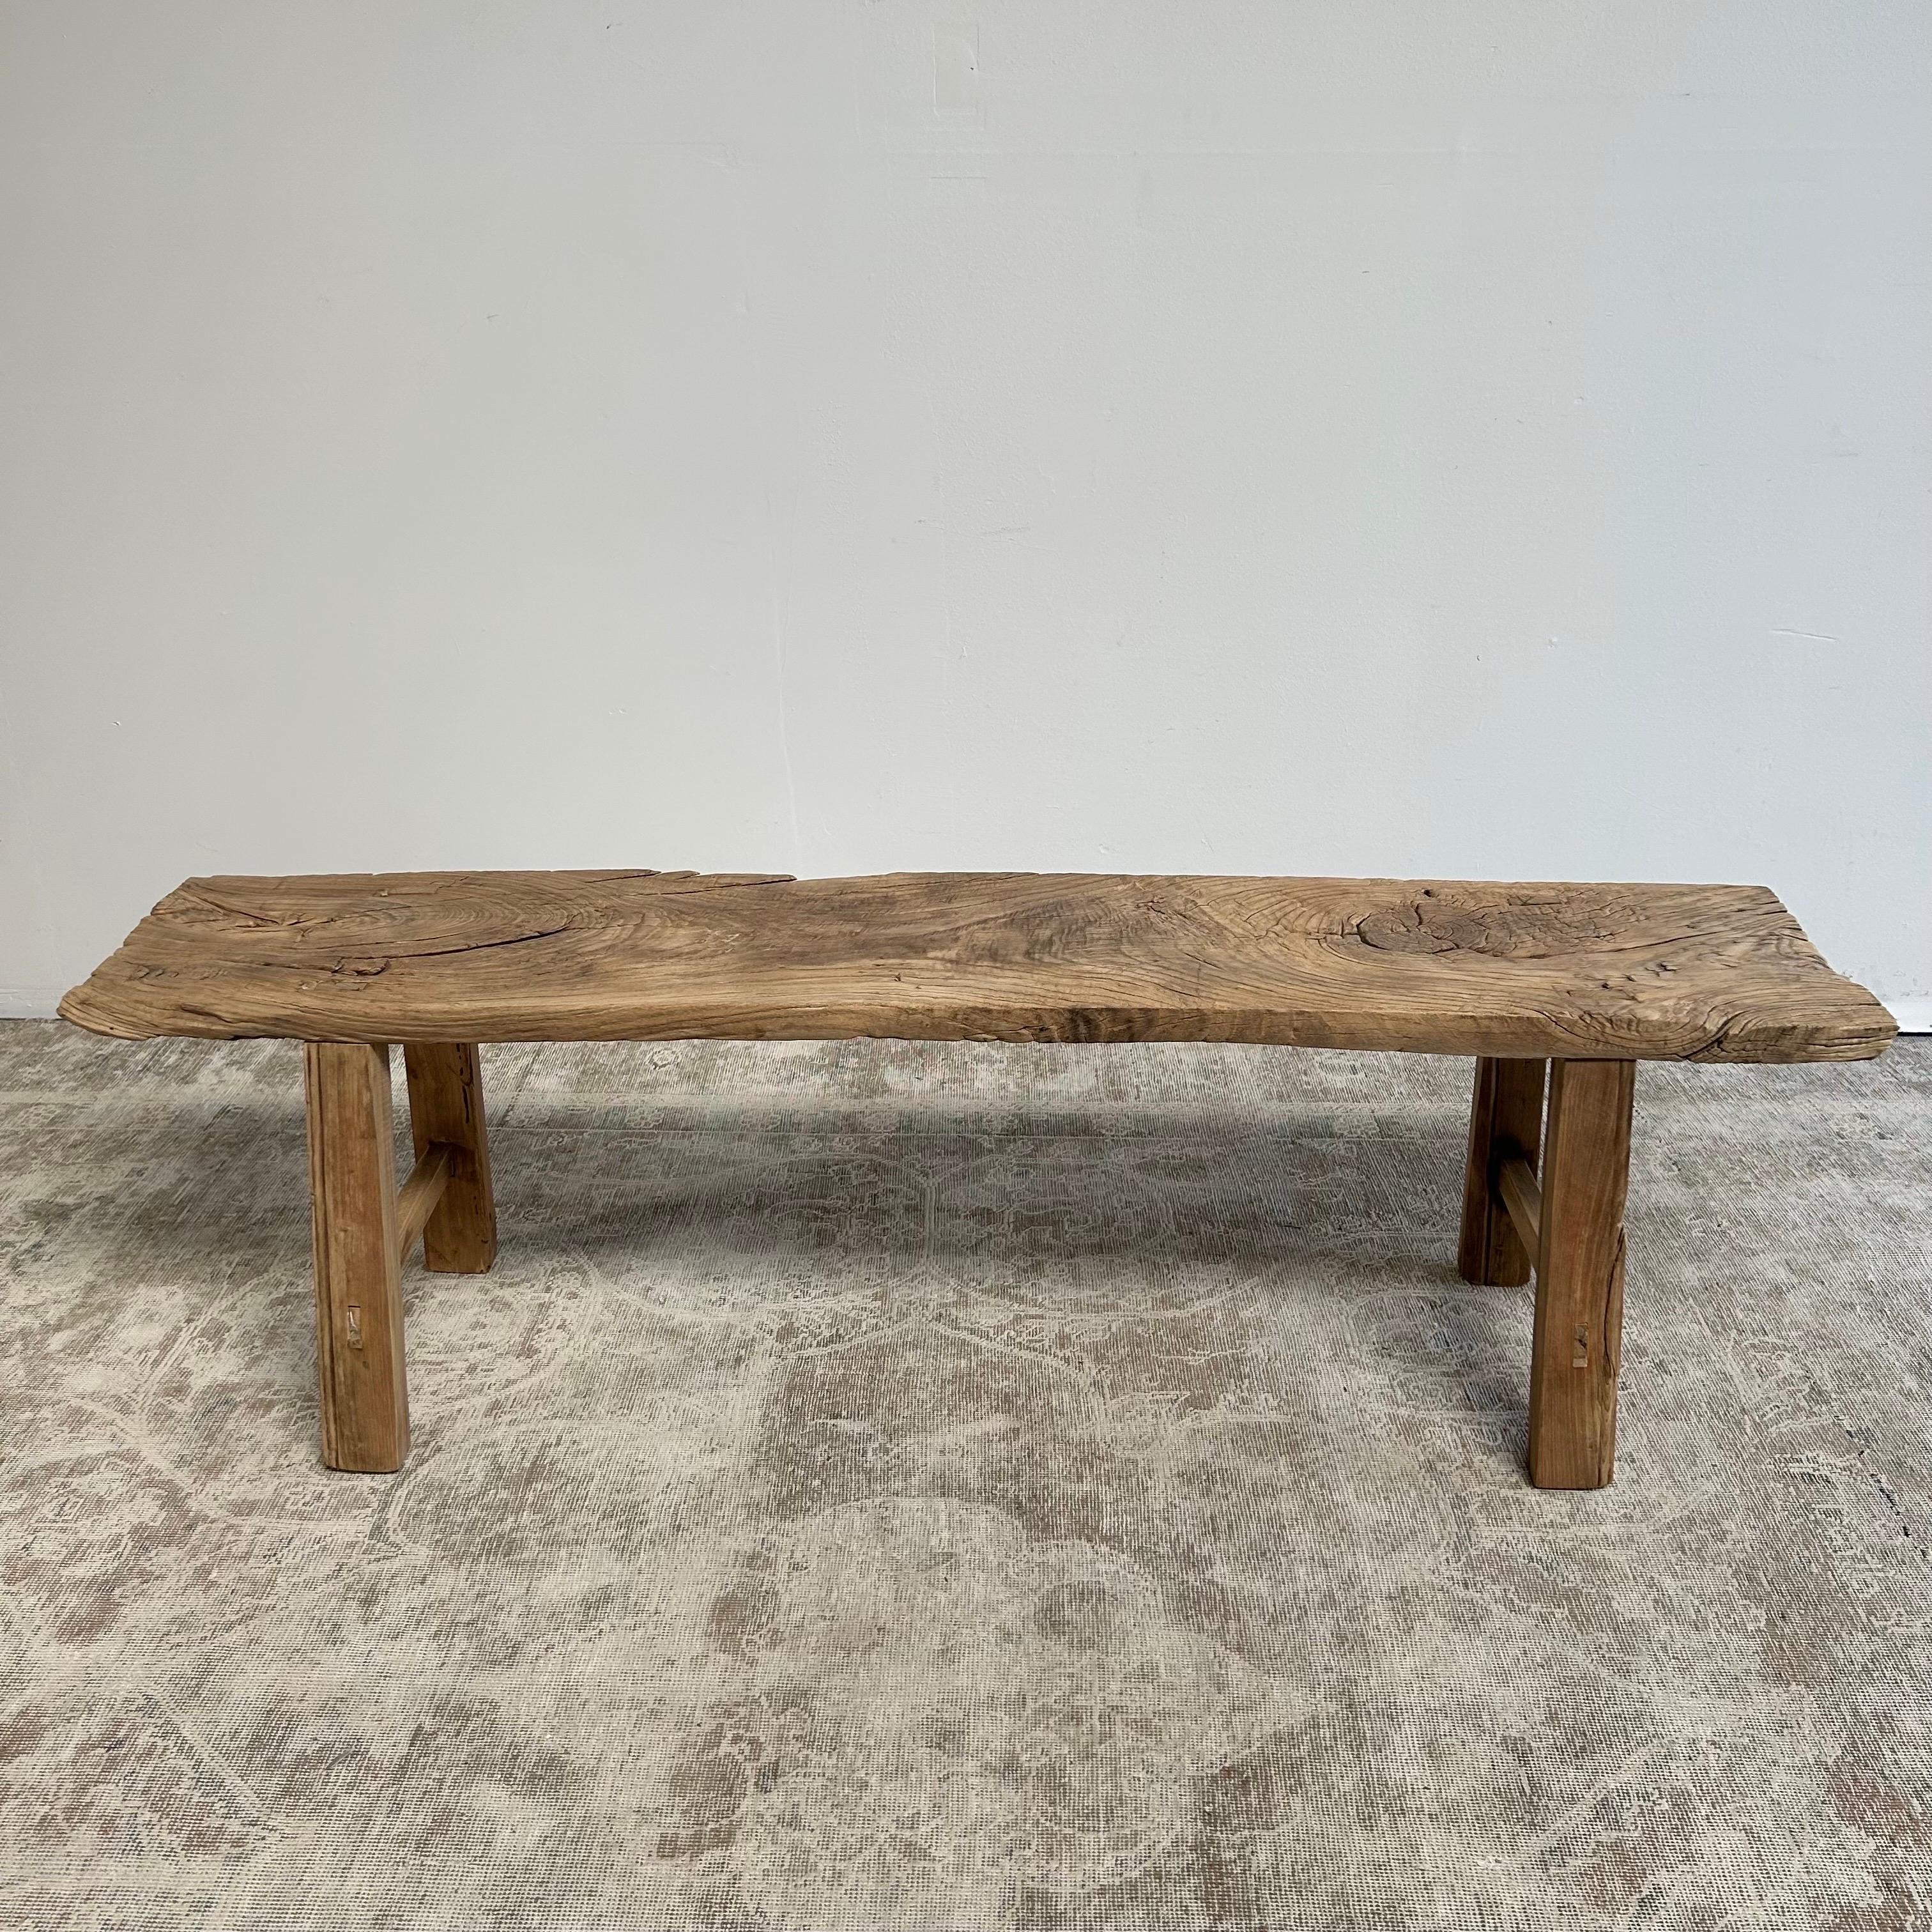 Asian Vintage Elm Wood Coffee Table or Bench